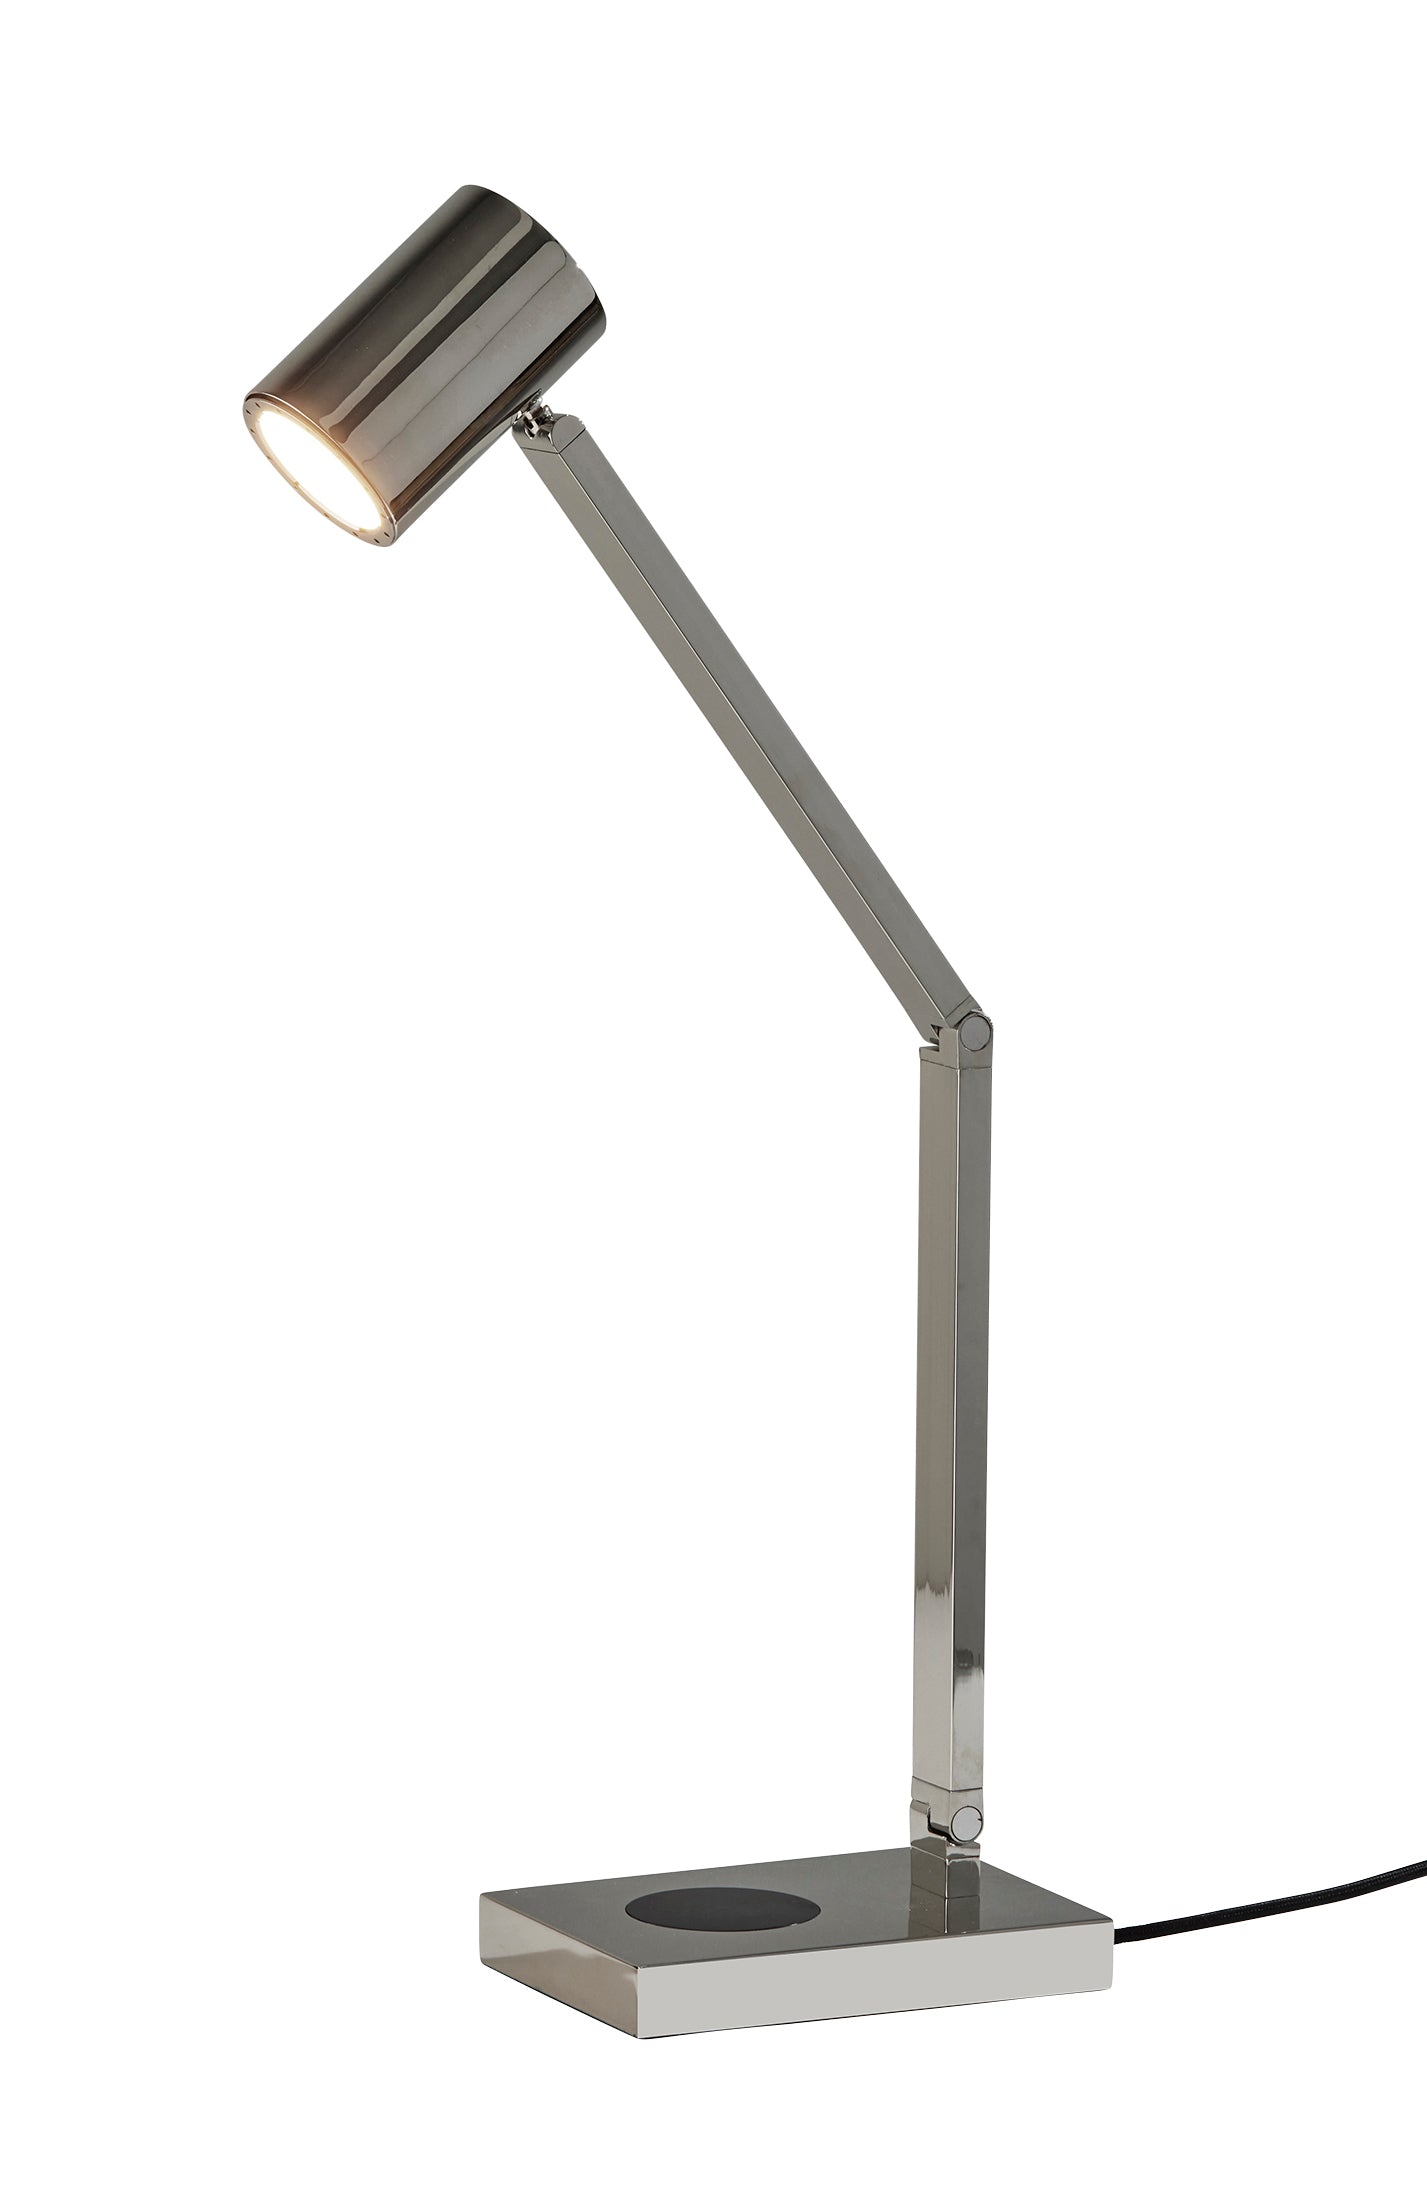 NEWMAN Table lamp Nickel - 10036311PN | ADESSO